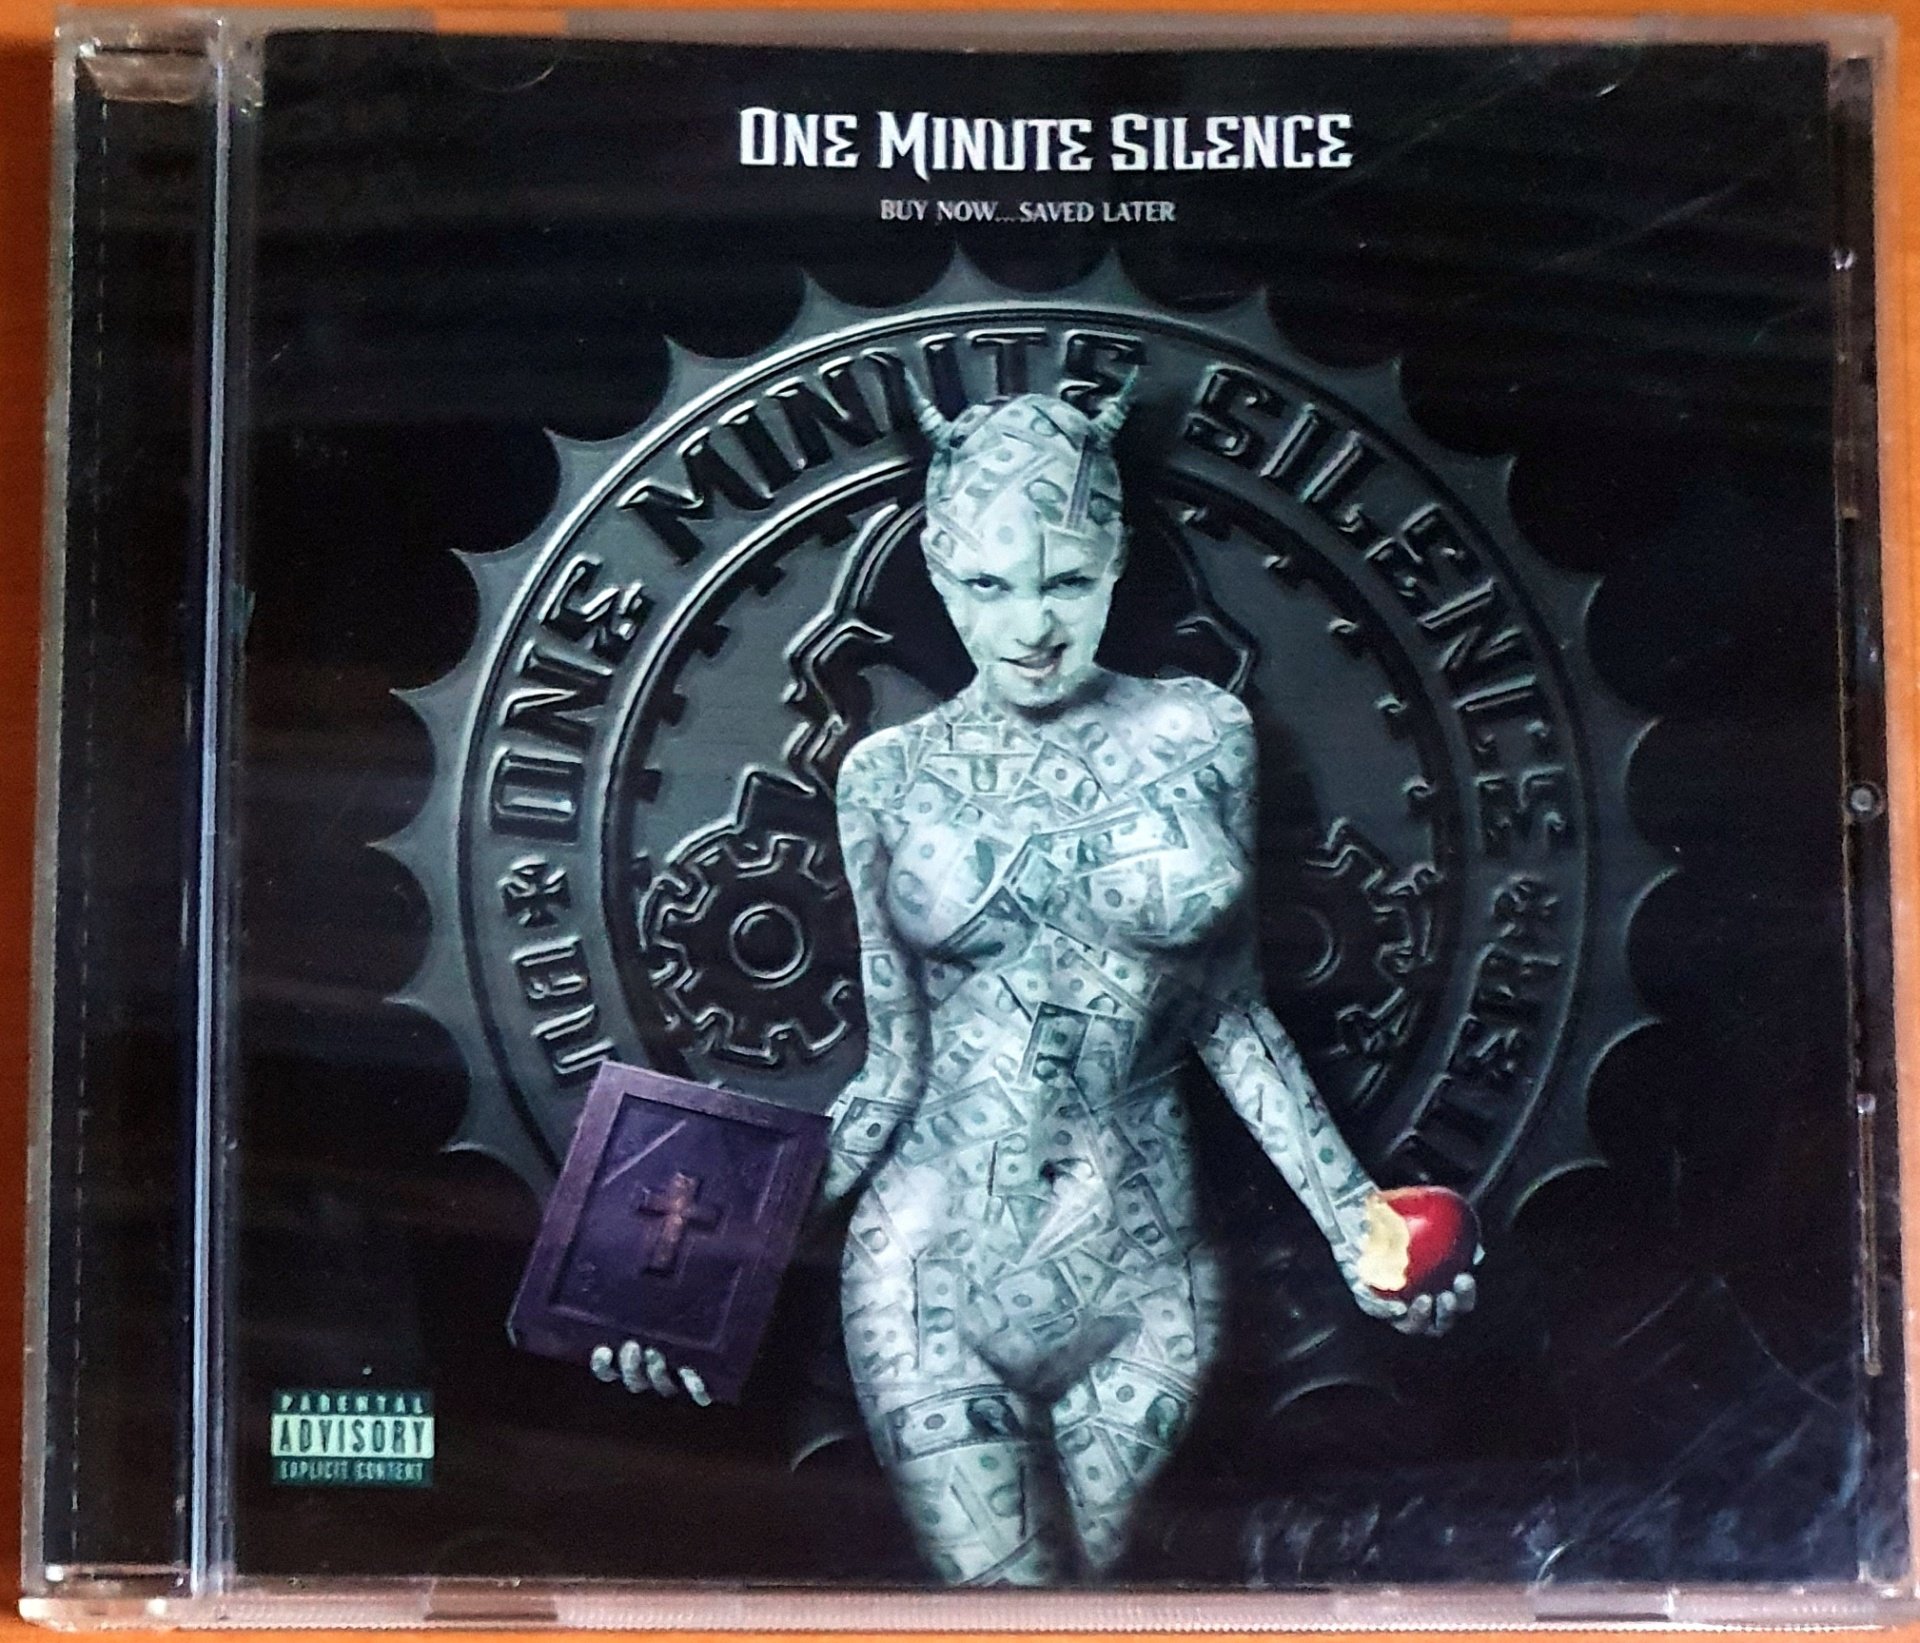 ONE MINUTE SILENCE - BUY NOW...SAVED LATER (2000) - CD 2.EL